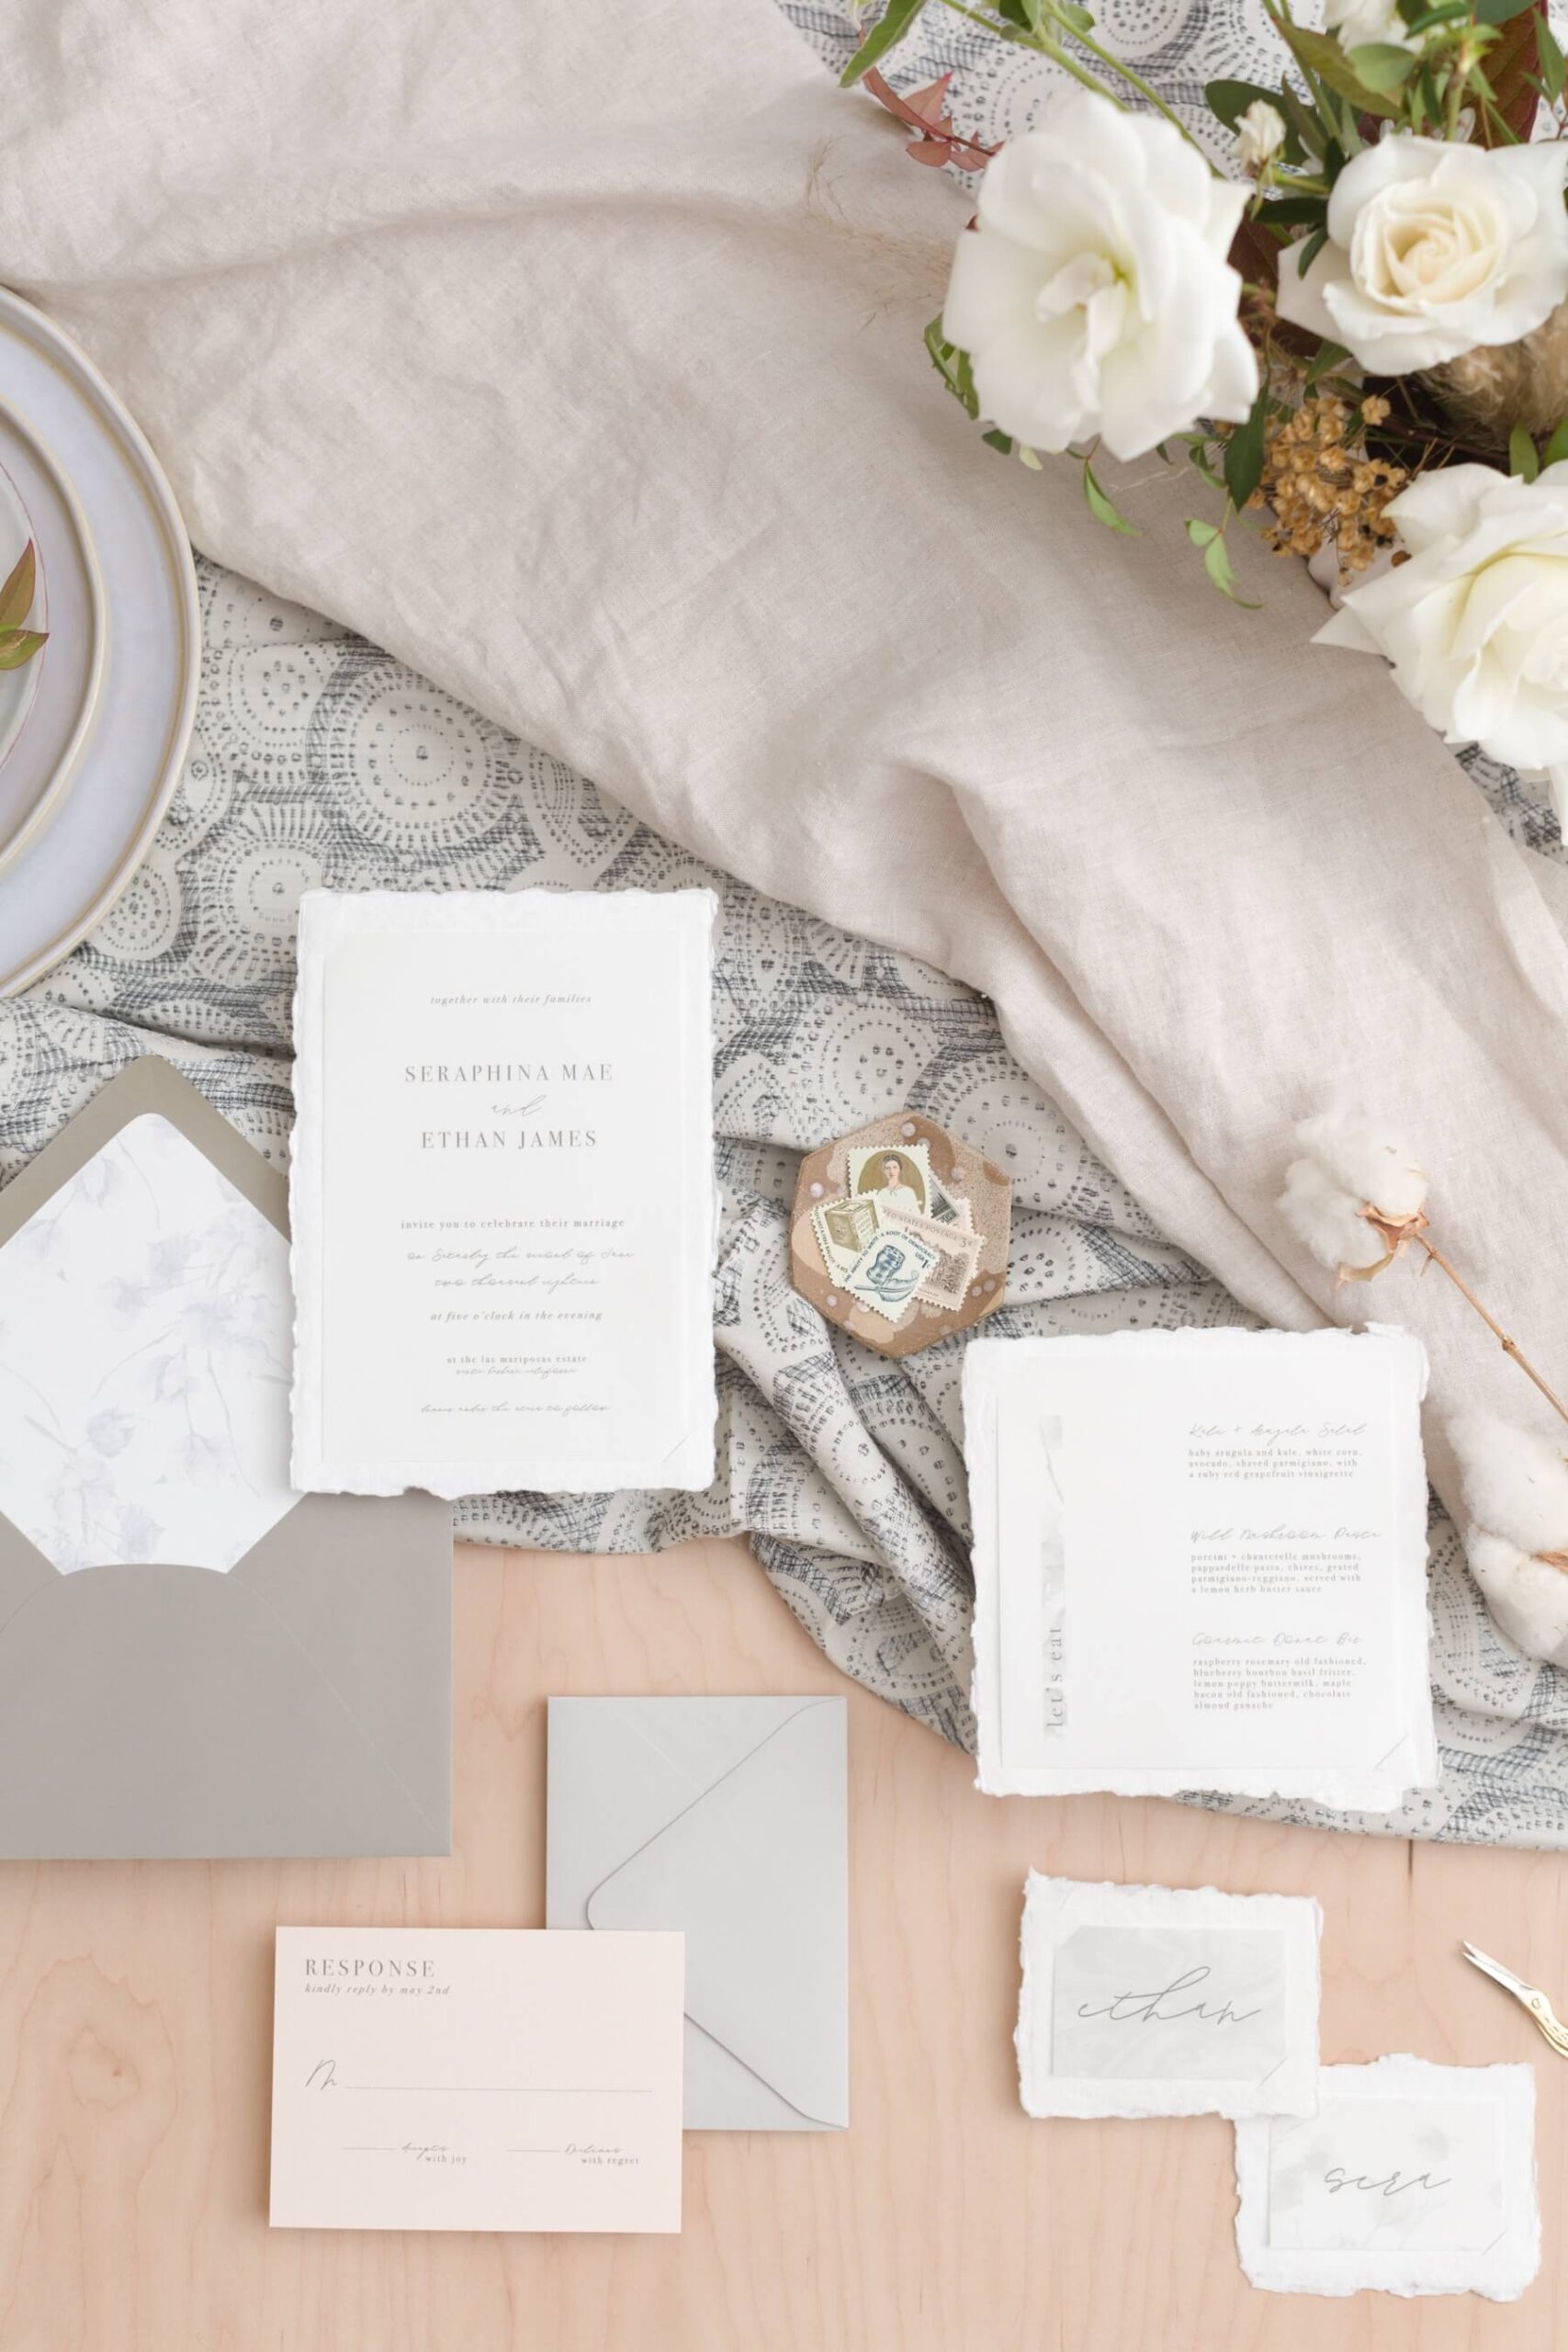 Invitation flat lay with vintage stamps, patterned fabric, and white flowers